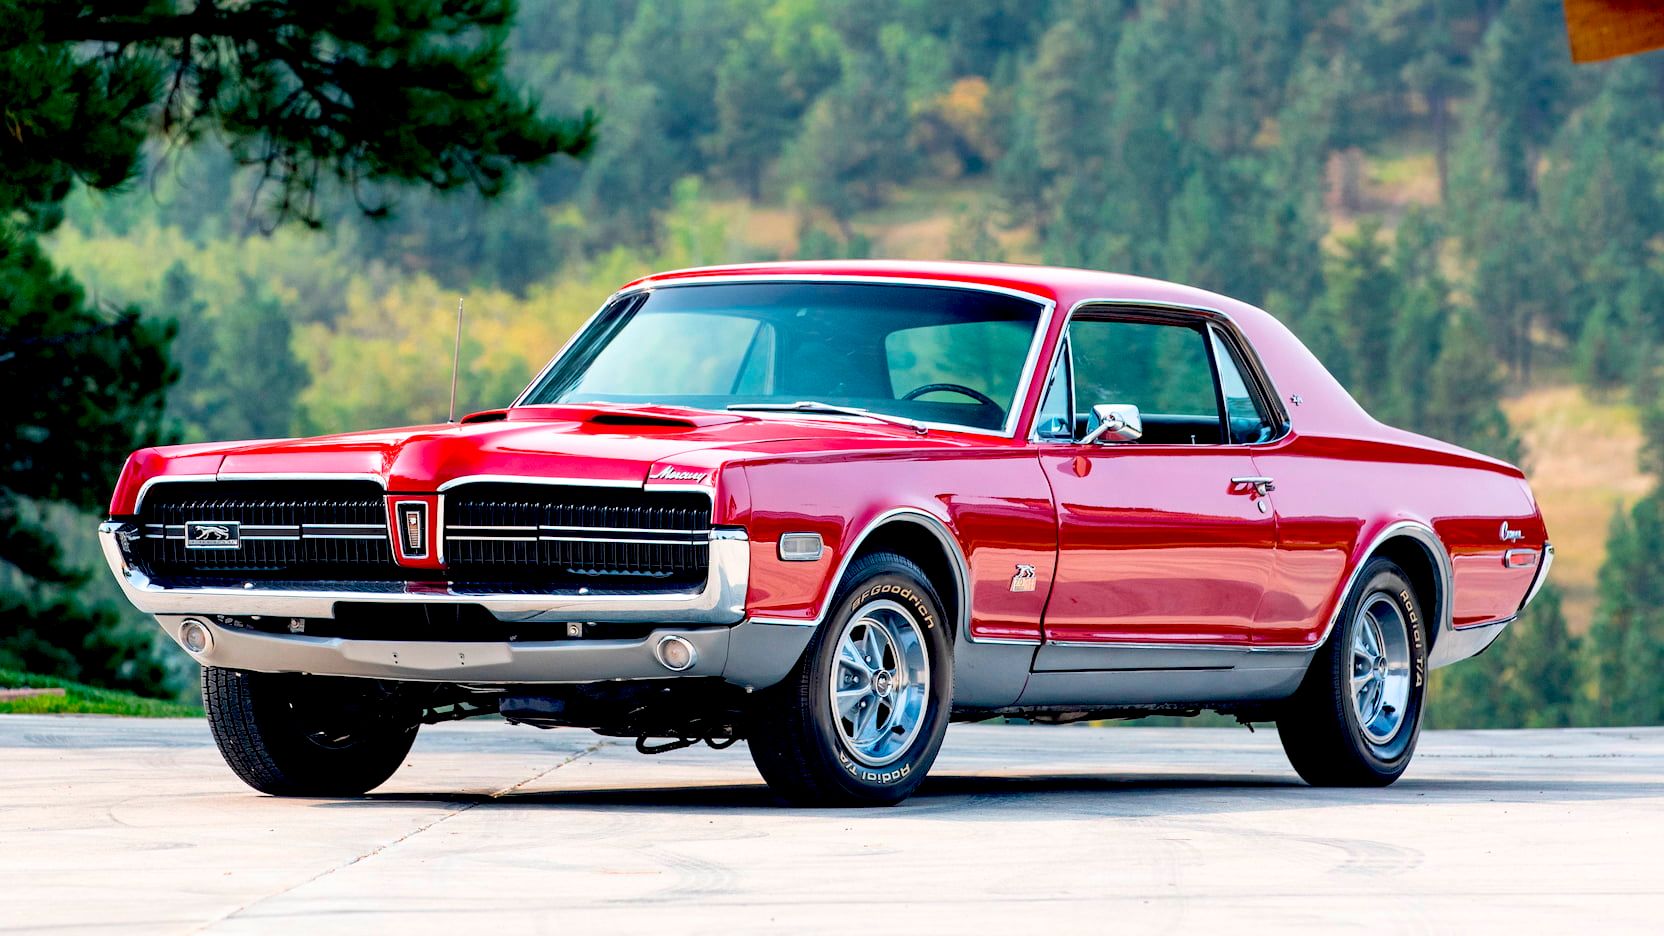 1968 Mercury Cougar Gt E Performance Price And Photos